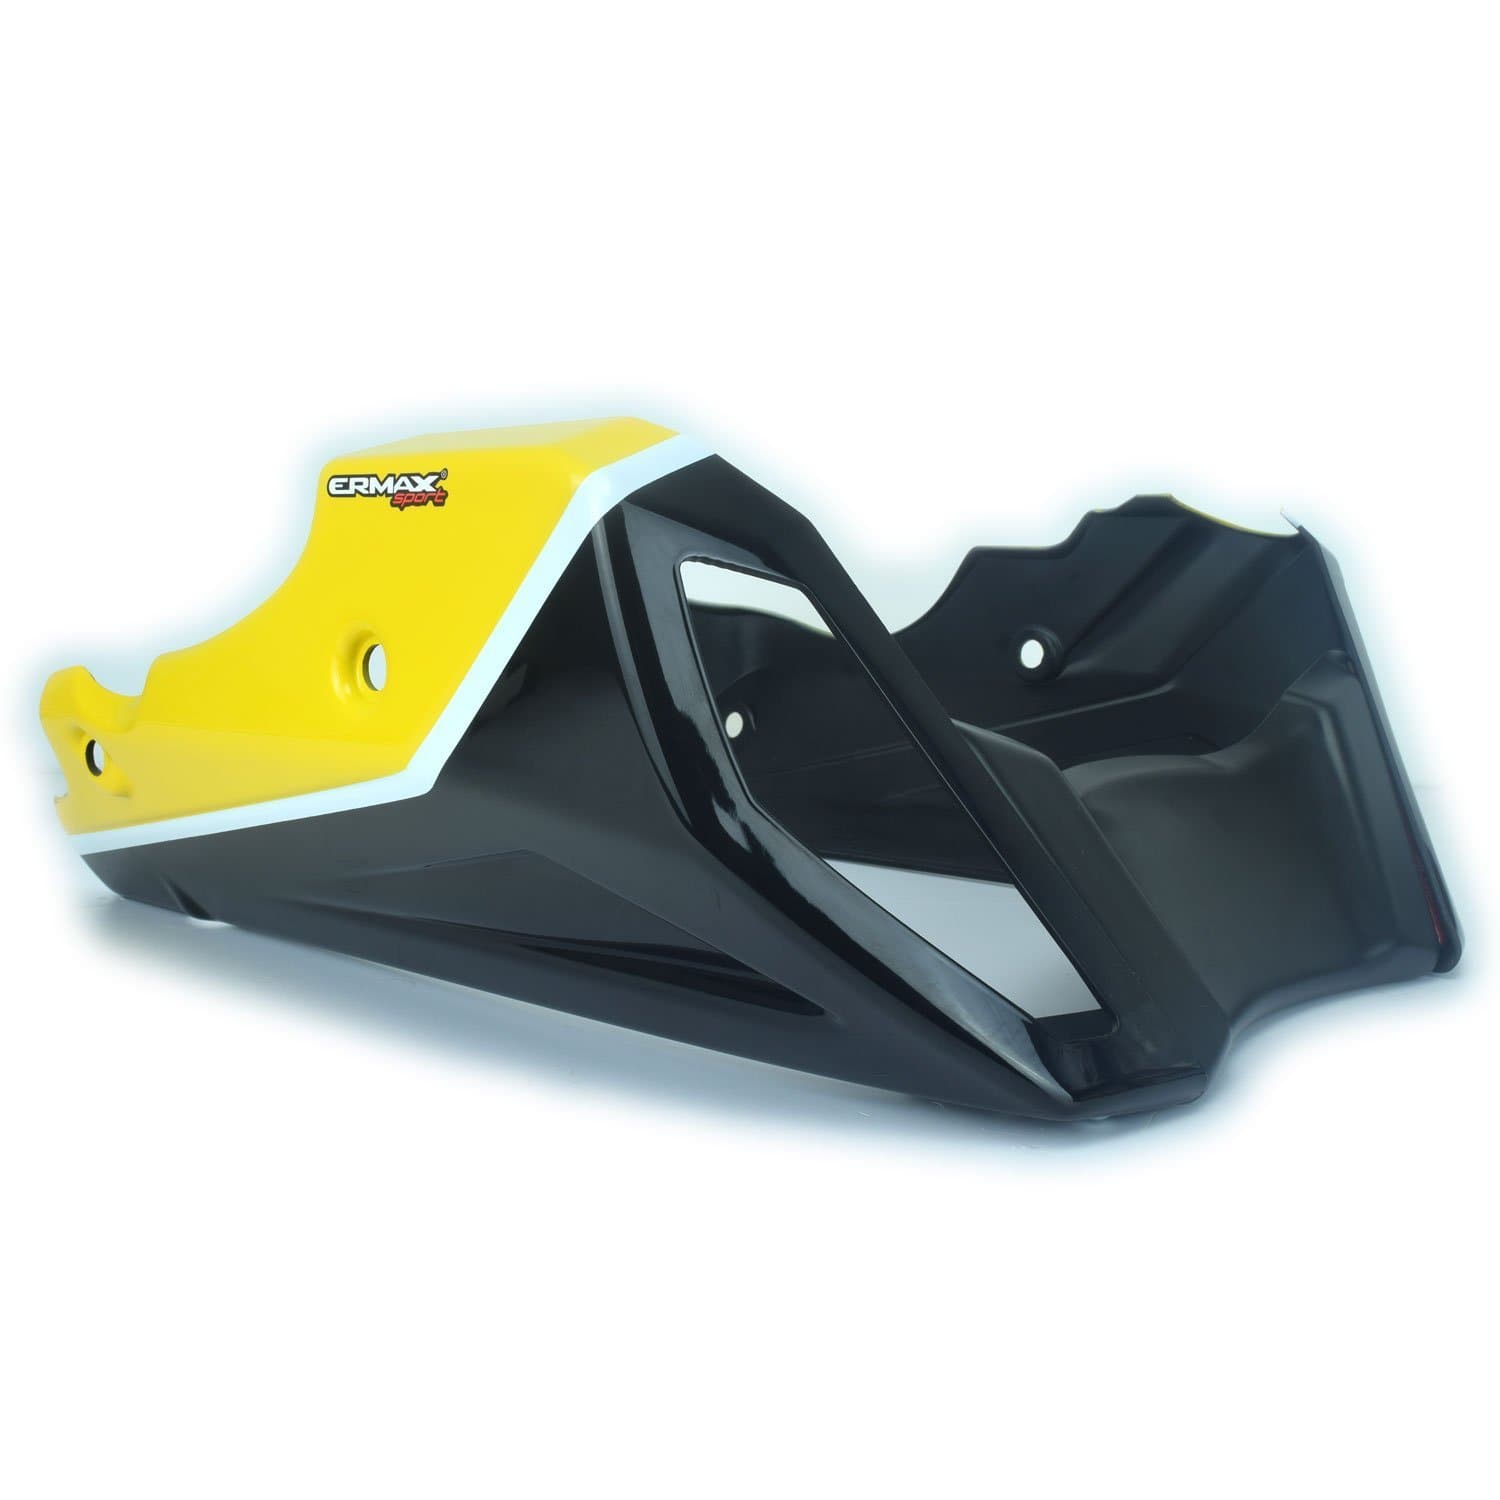 Ermax Belly Pan | Gloss Yellow/Matte Black (60th Anniversary) | Yamaha XSR 900 2016>2016-E890281131-Belly Pans-Pyramid Motorcycle Accessories